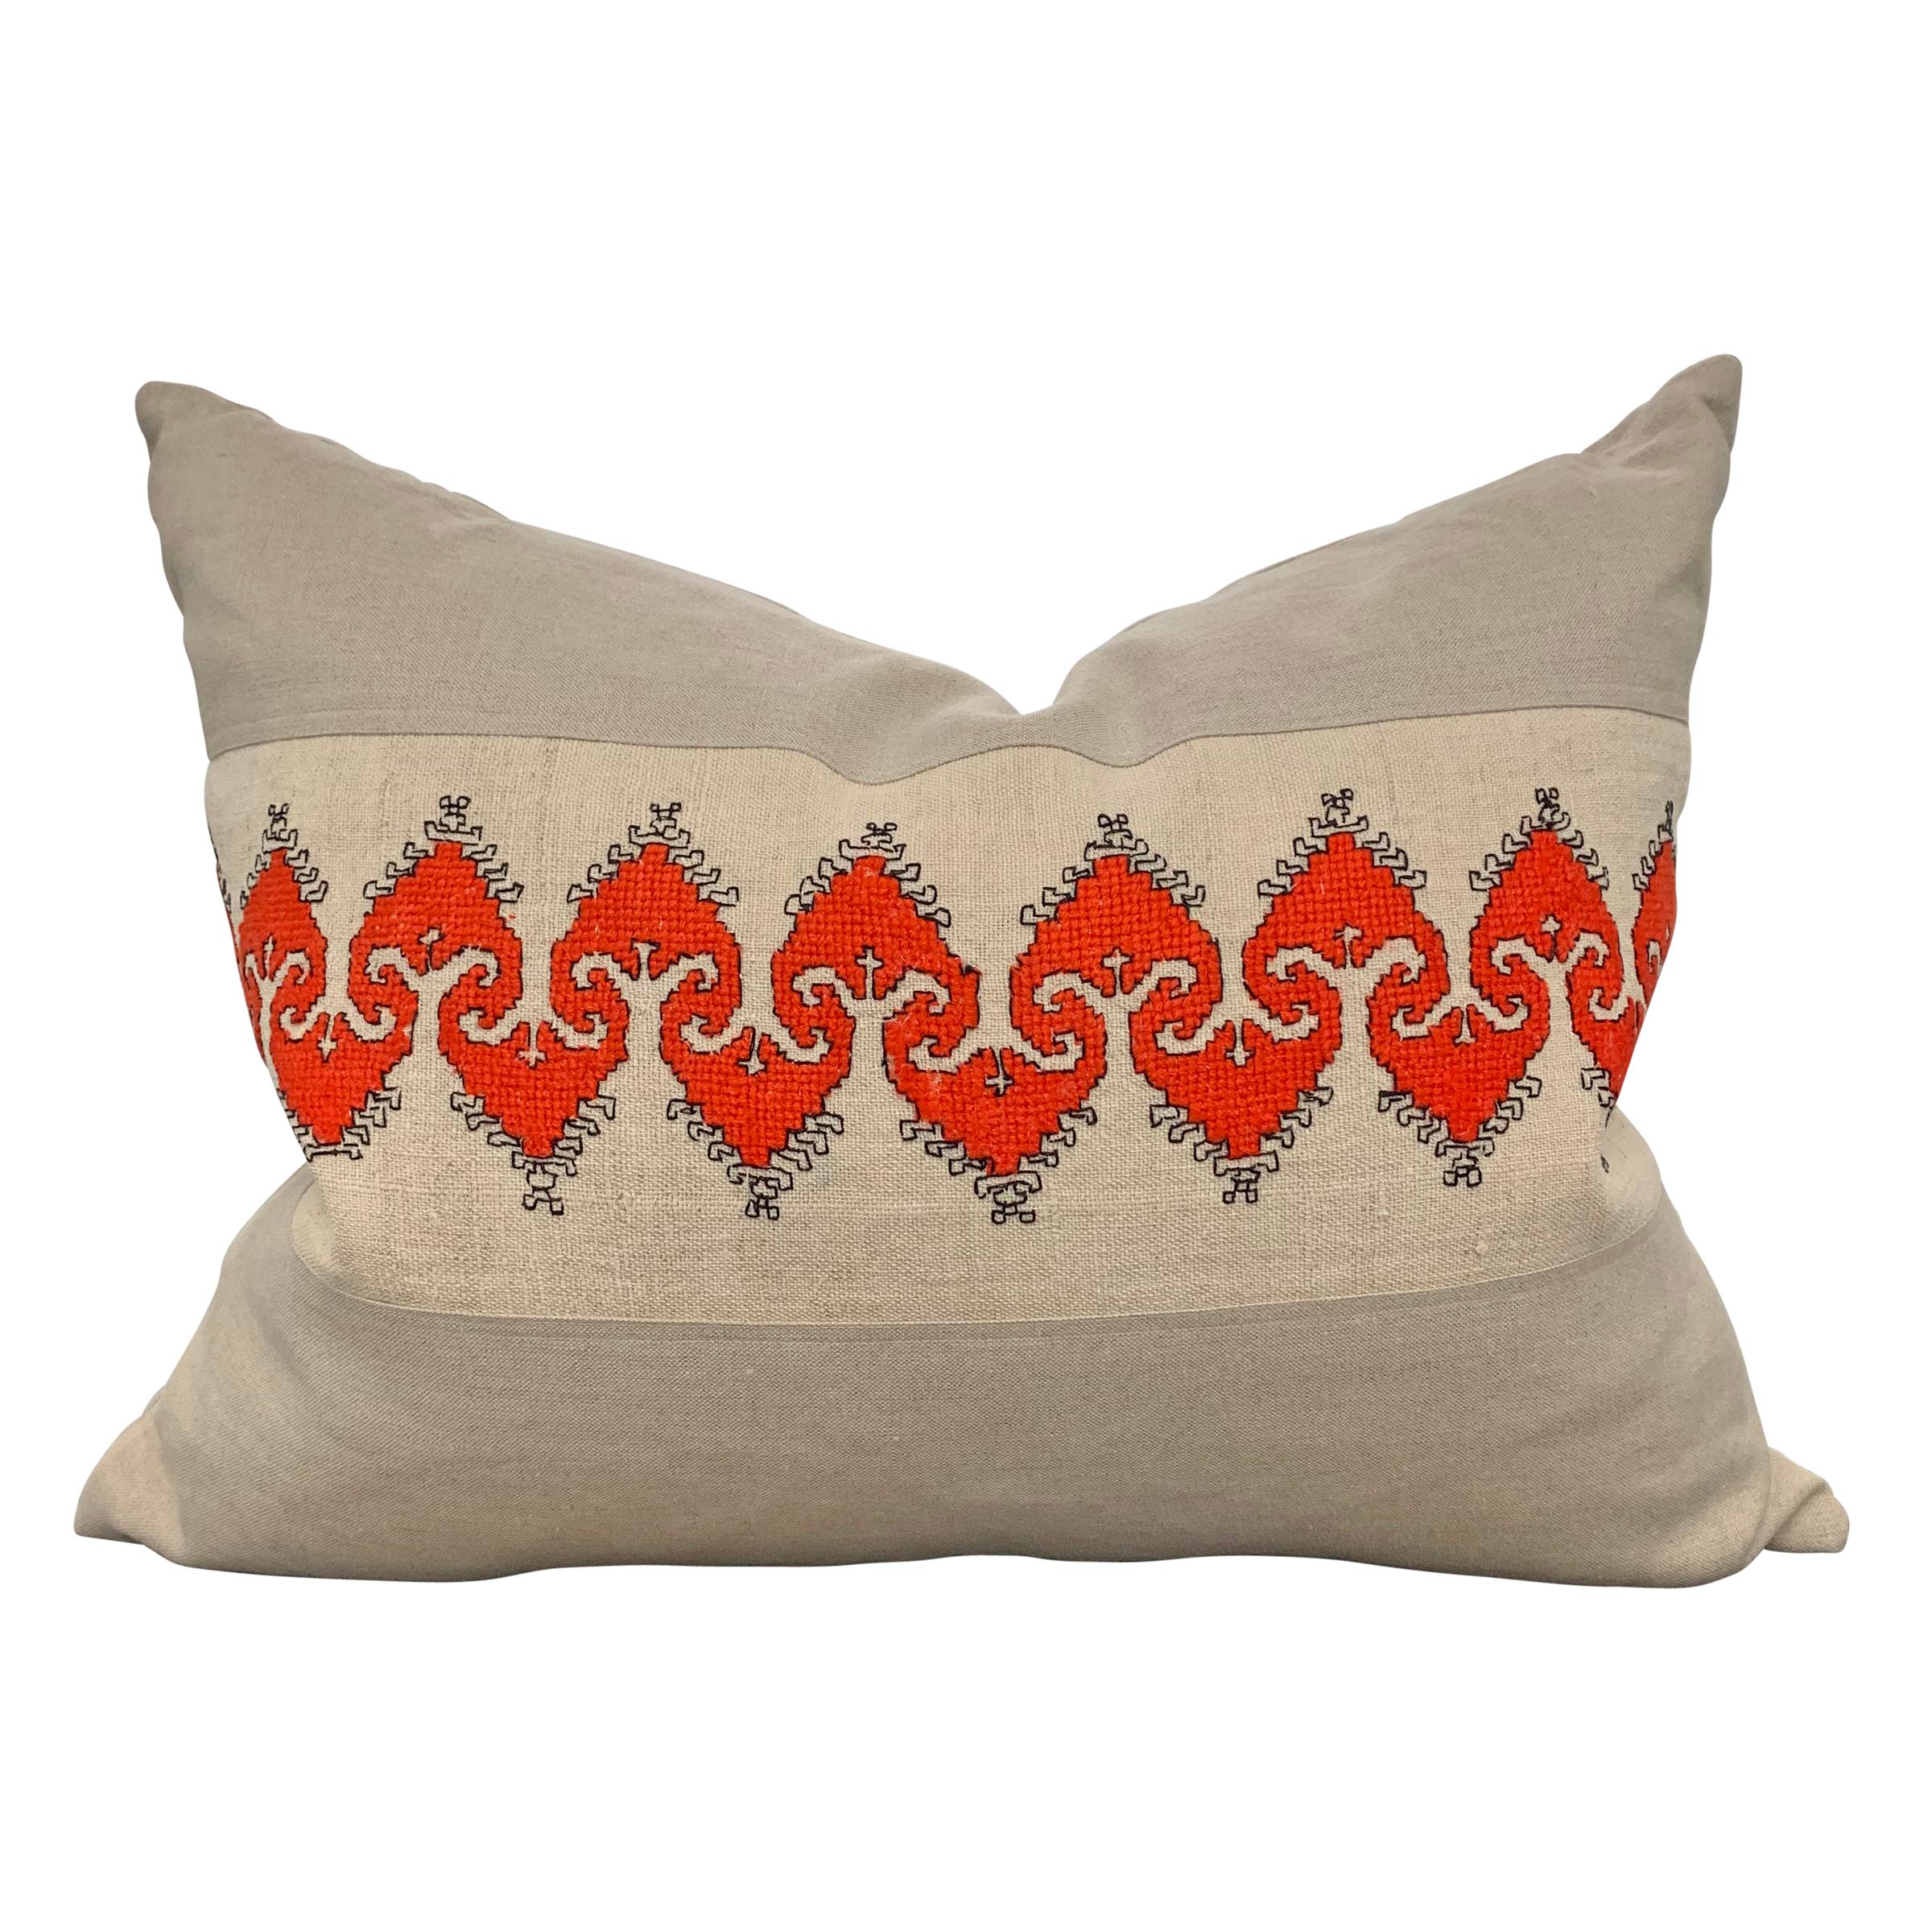 A wonderful pair of pillows made from panels of early 20th century Bulgarian folk embroidery using a brilliant coral colored thread, mounted and back with handwoven linen. Filled with down.